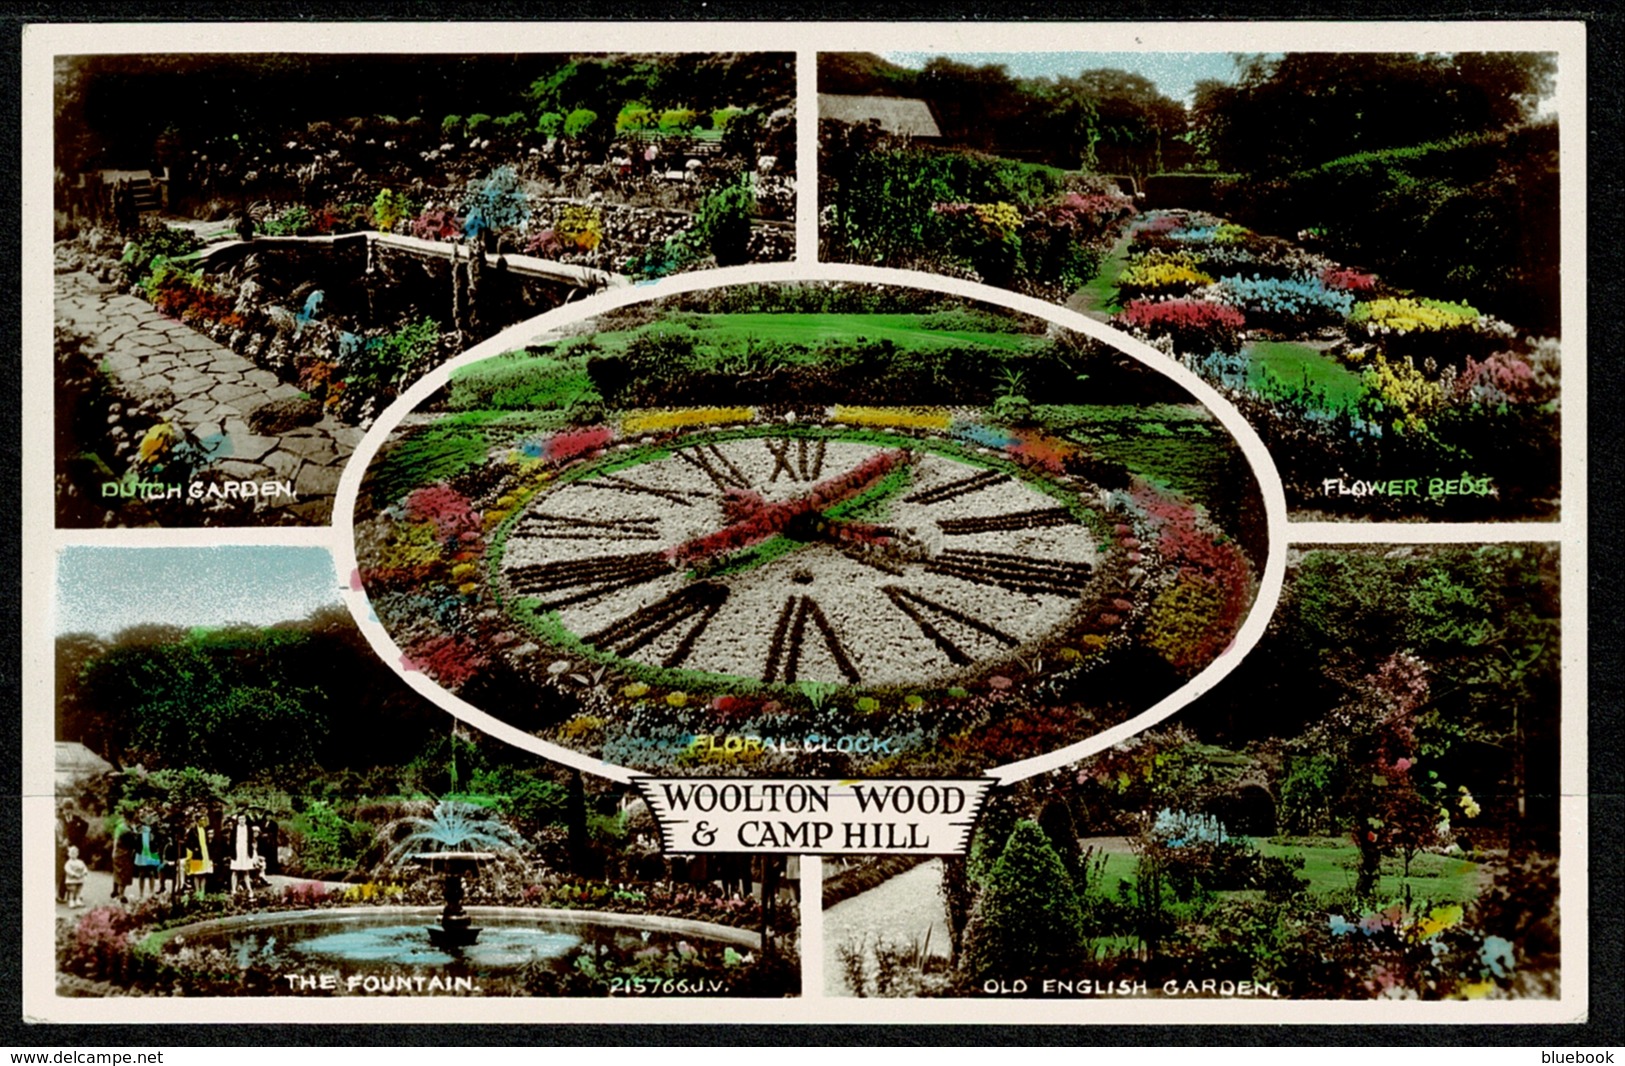 Ref 1278 - Real Photo Multiview Postcard - Floral Clock - Woolton Wood & Camp Hill Liverpool - Lancashire - Liverpool